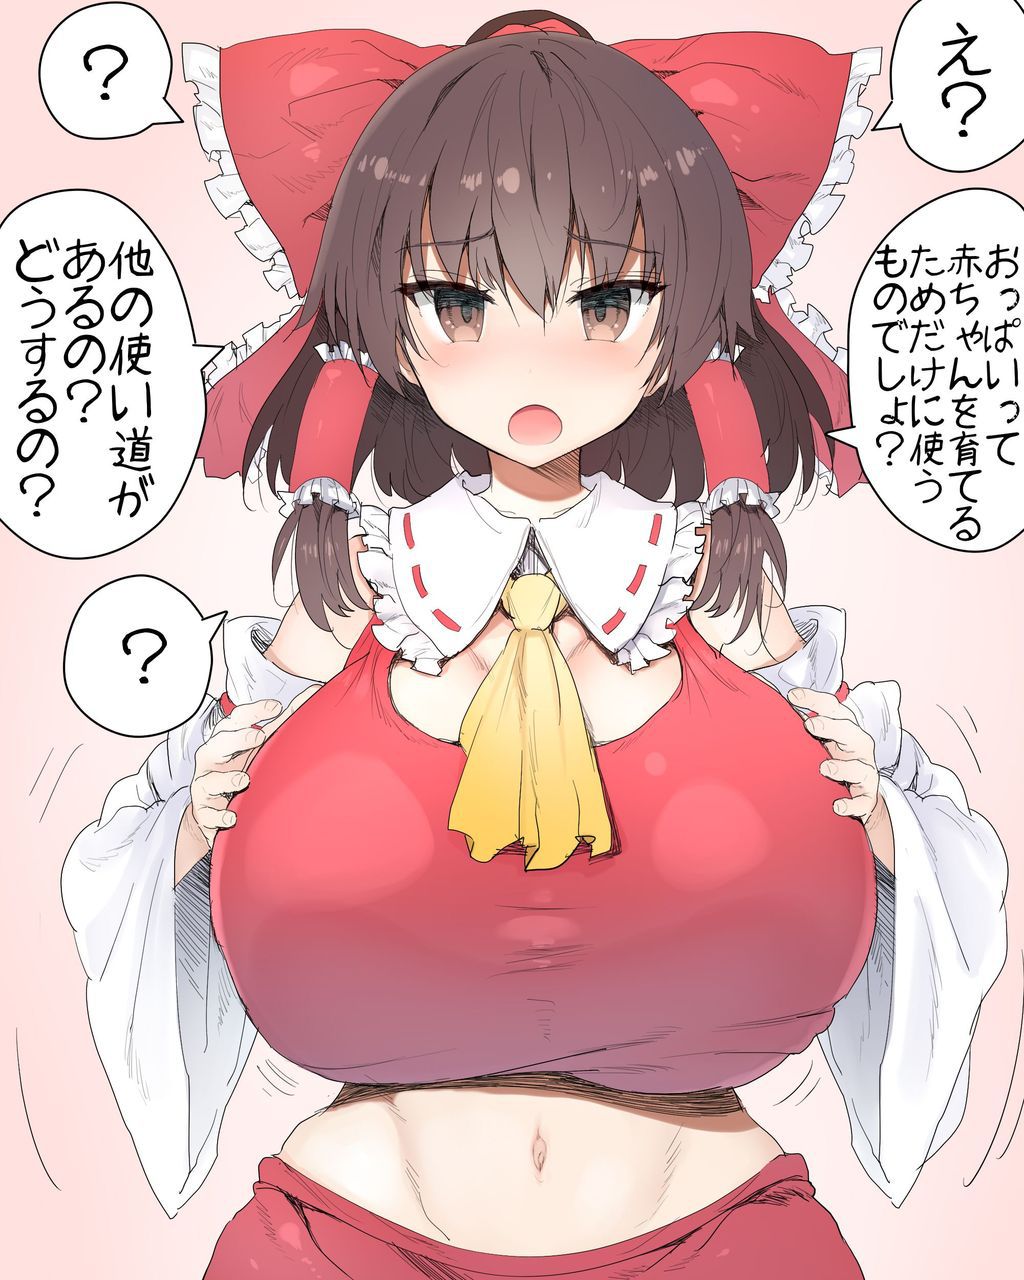 【Shrine Maiden】Please image of a girl in neat shrine maiden clothes Part 18 19